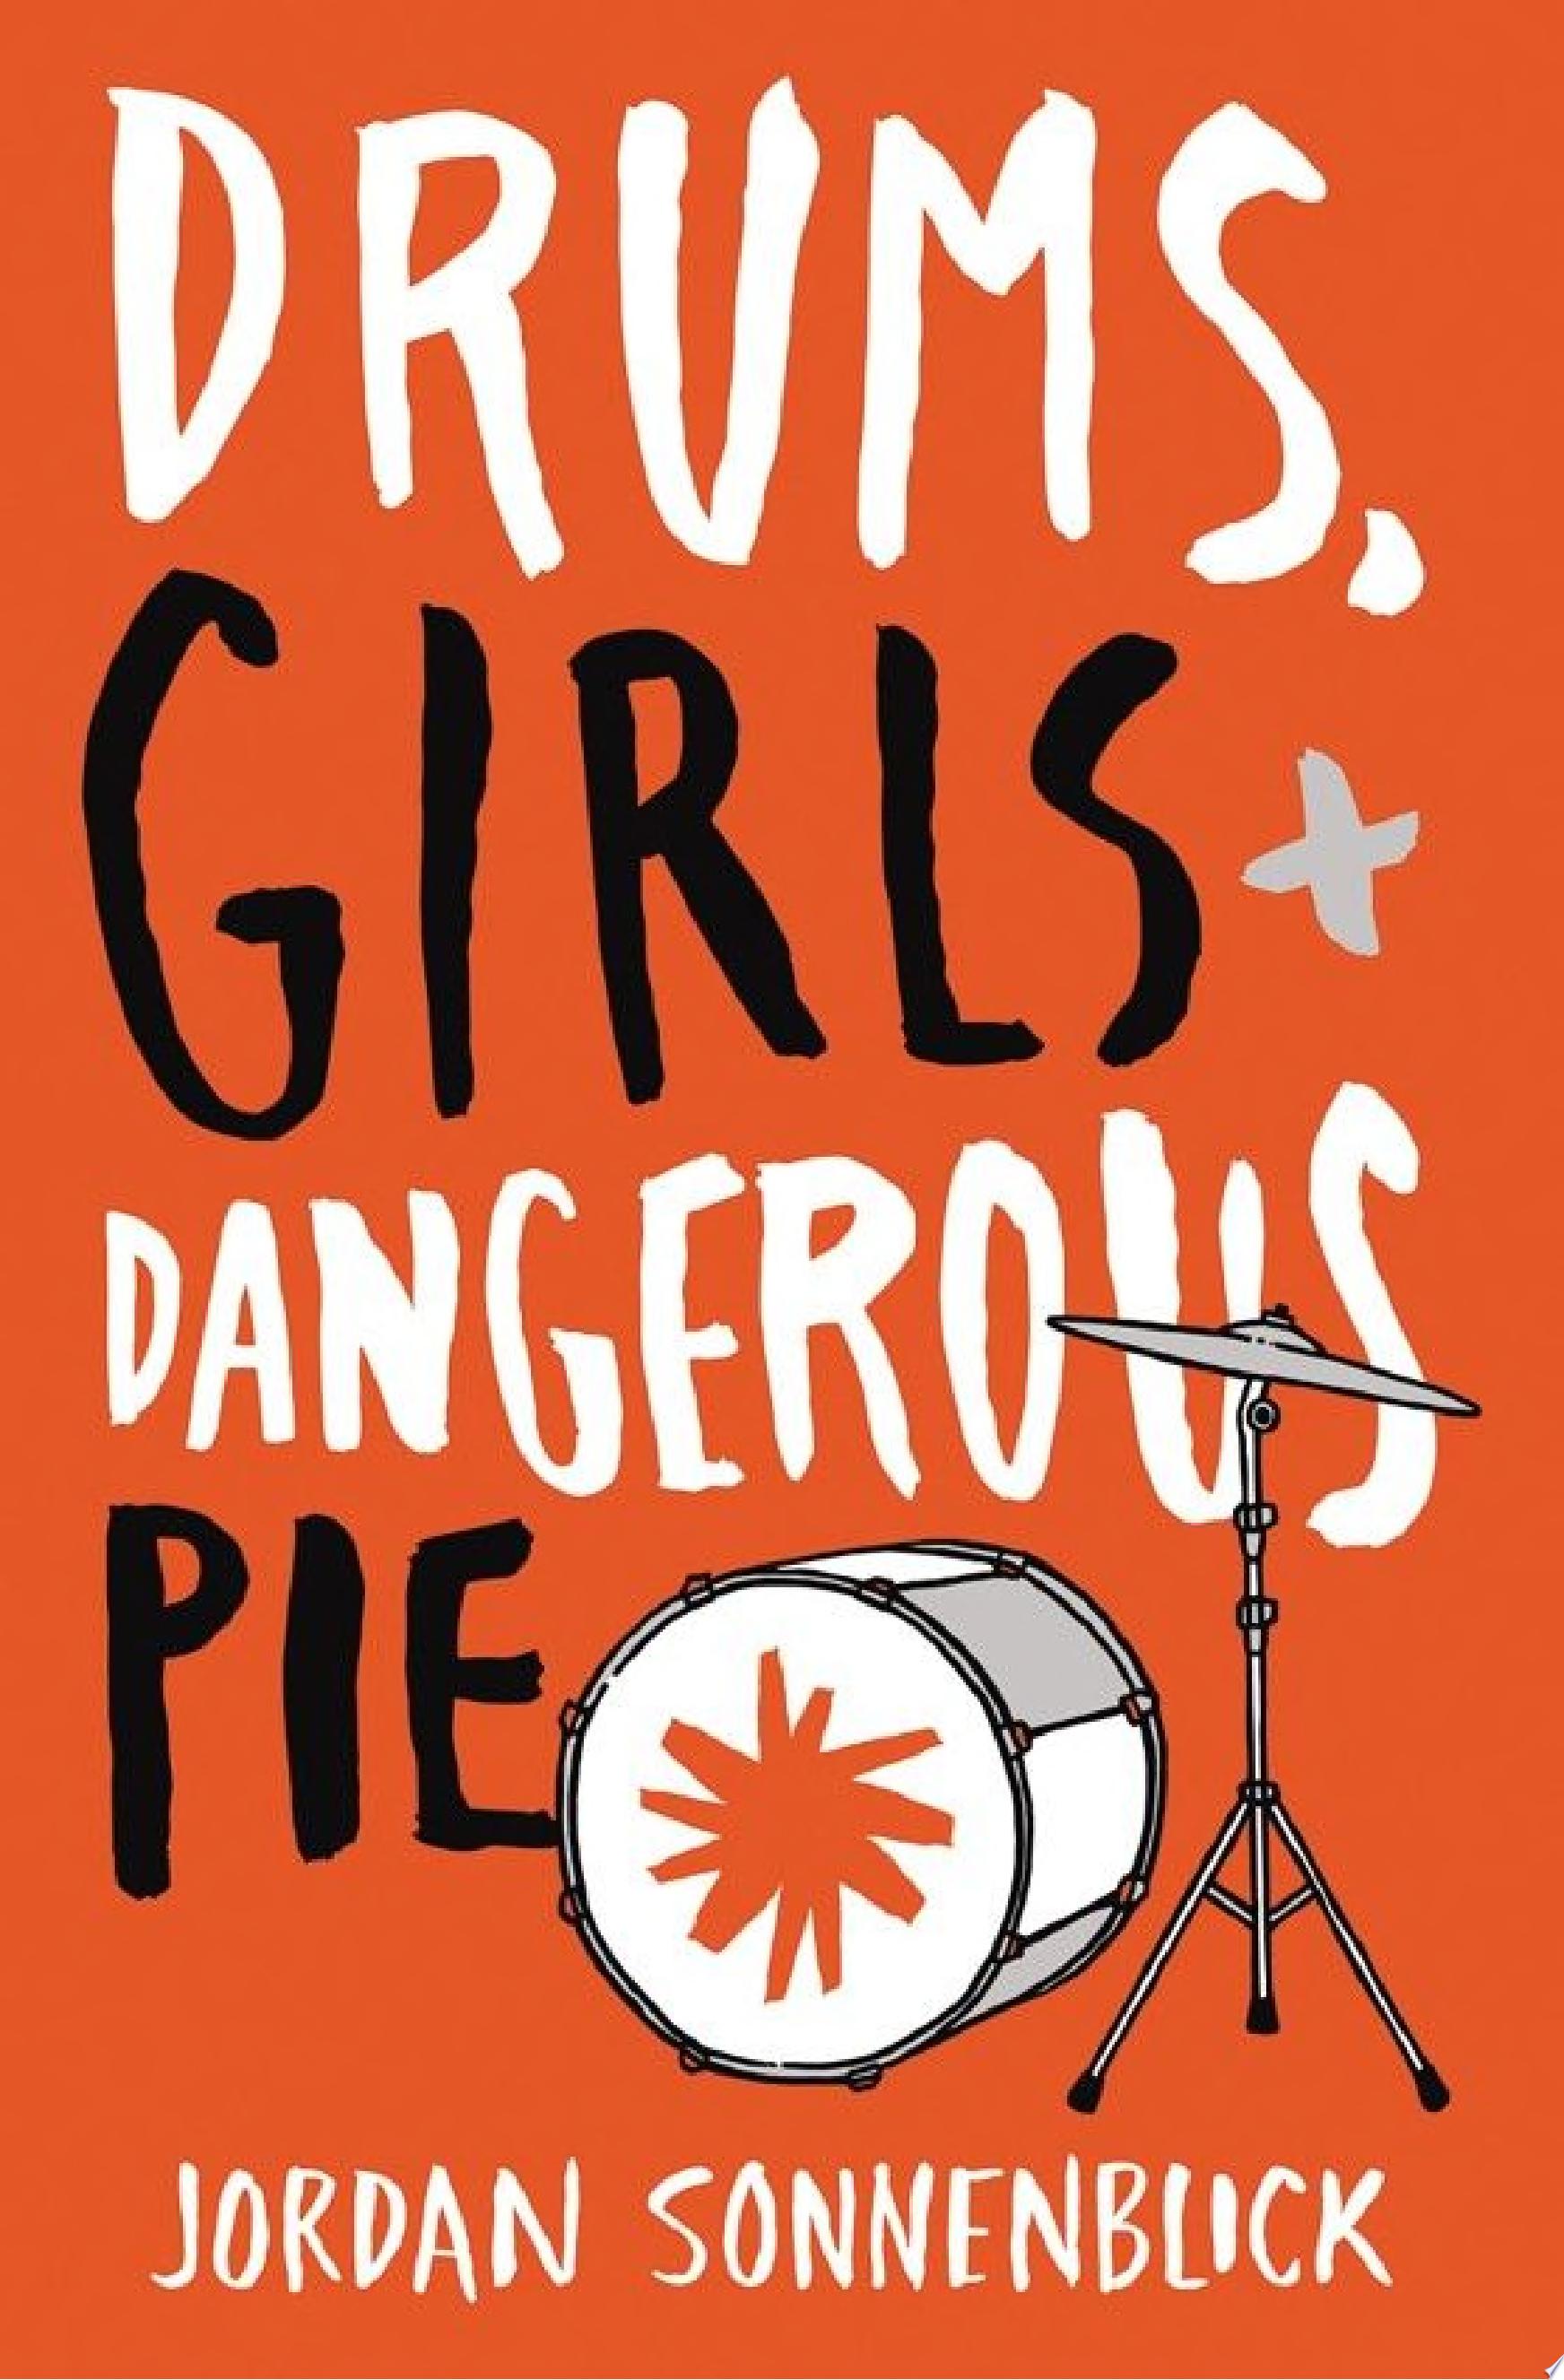 Image for "Drums, Girls, and Dangerous Pie"